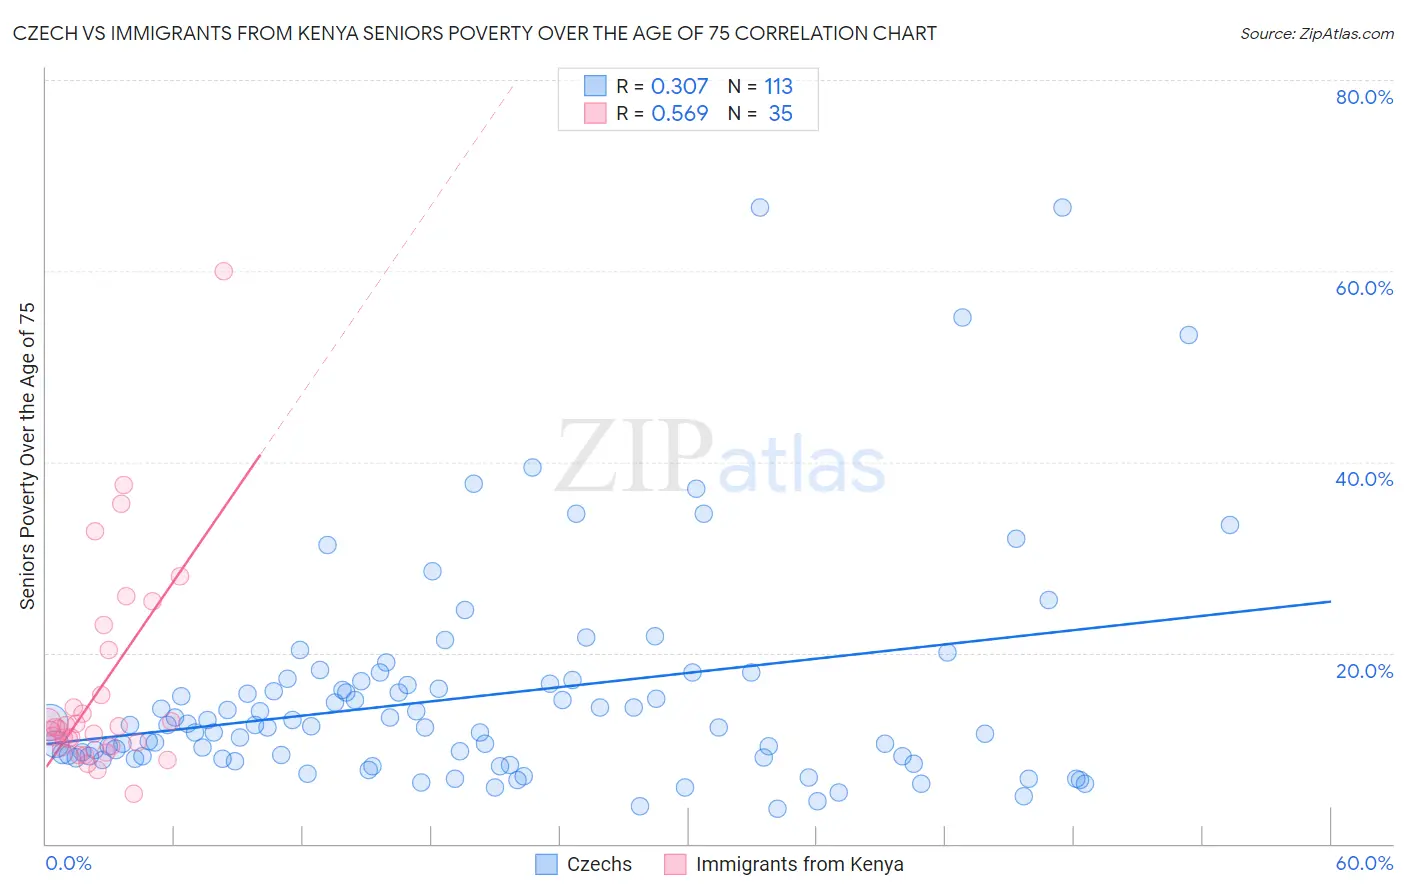 Czech vs Immigrants from Kenya Seniors Poverty Over the Age of 75